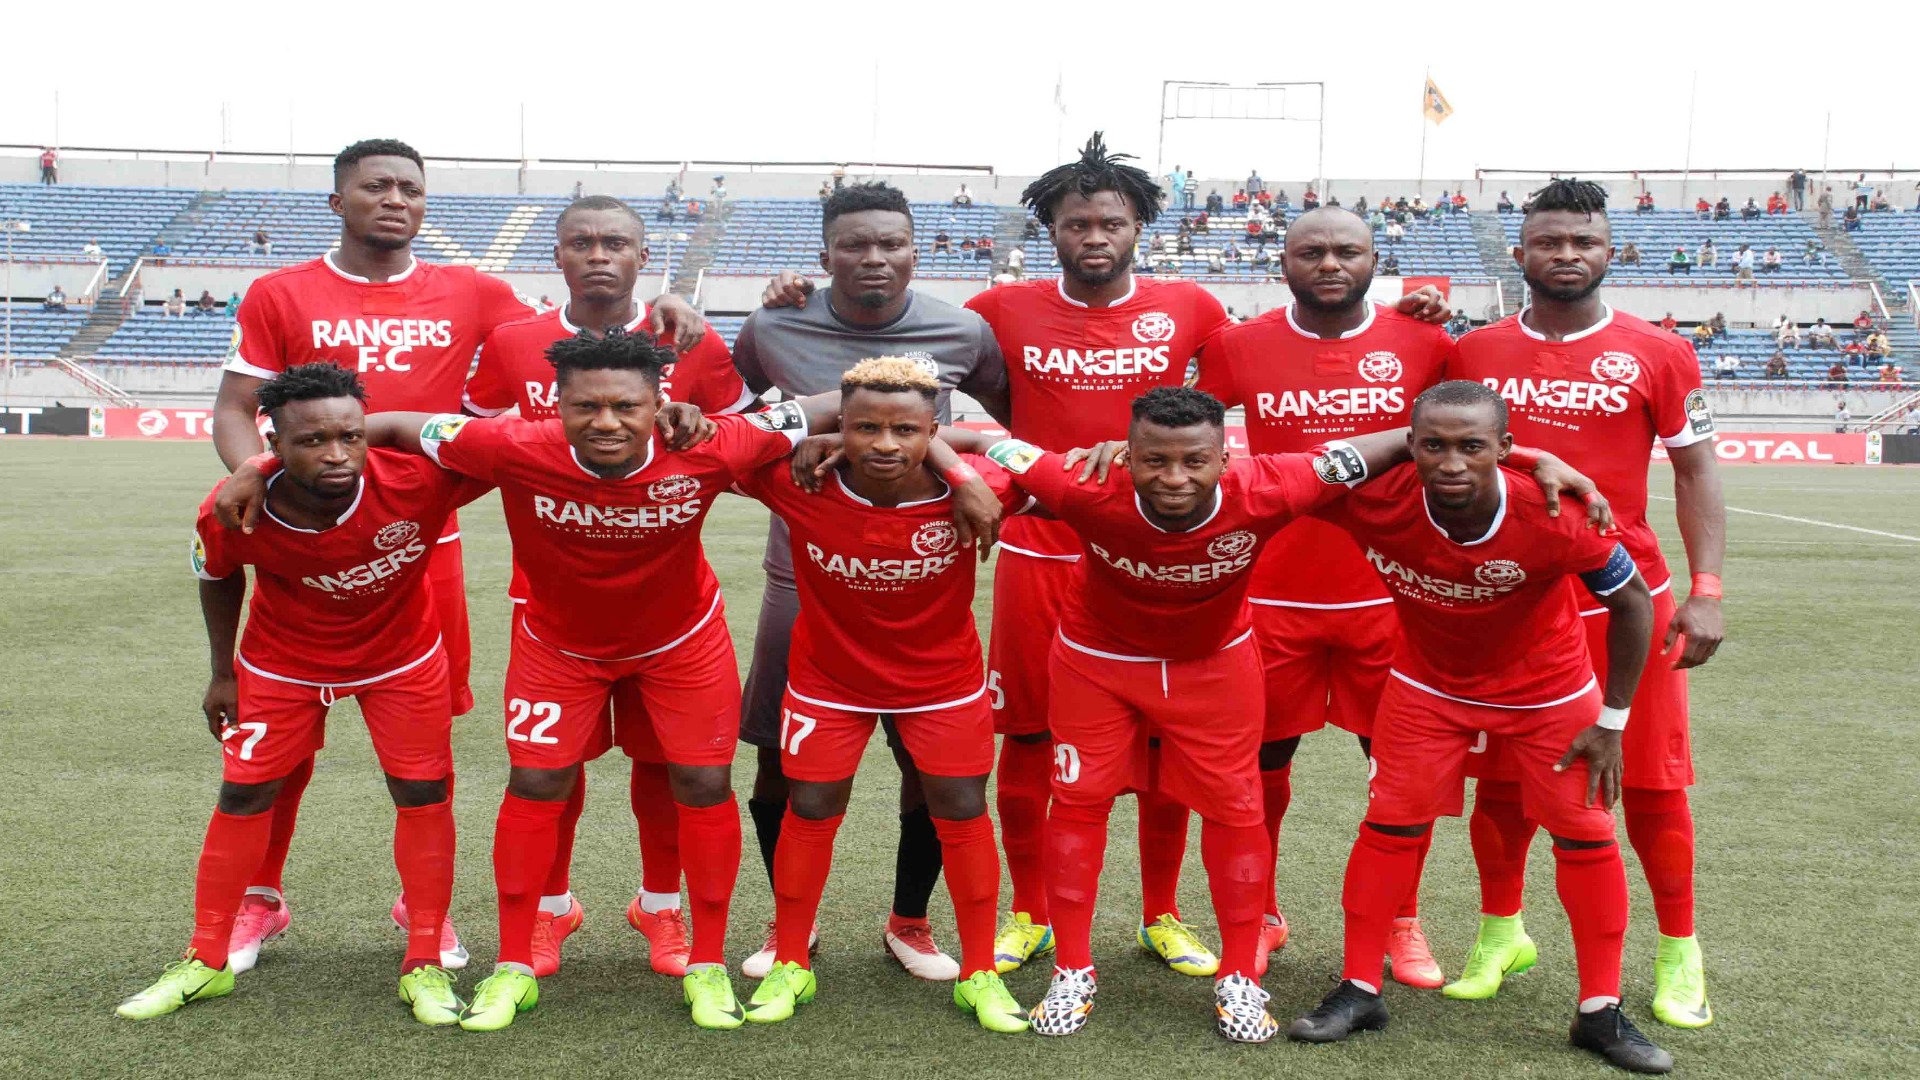 Rangers supporters club urges Mbah to complete renovation of Nnamdi Azikiwe Stadium